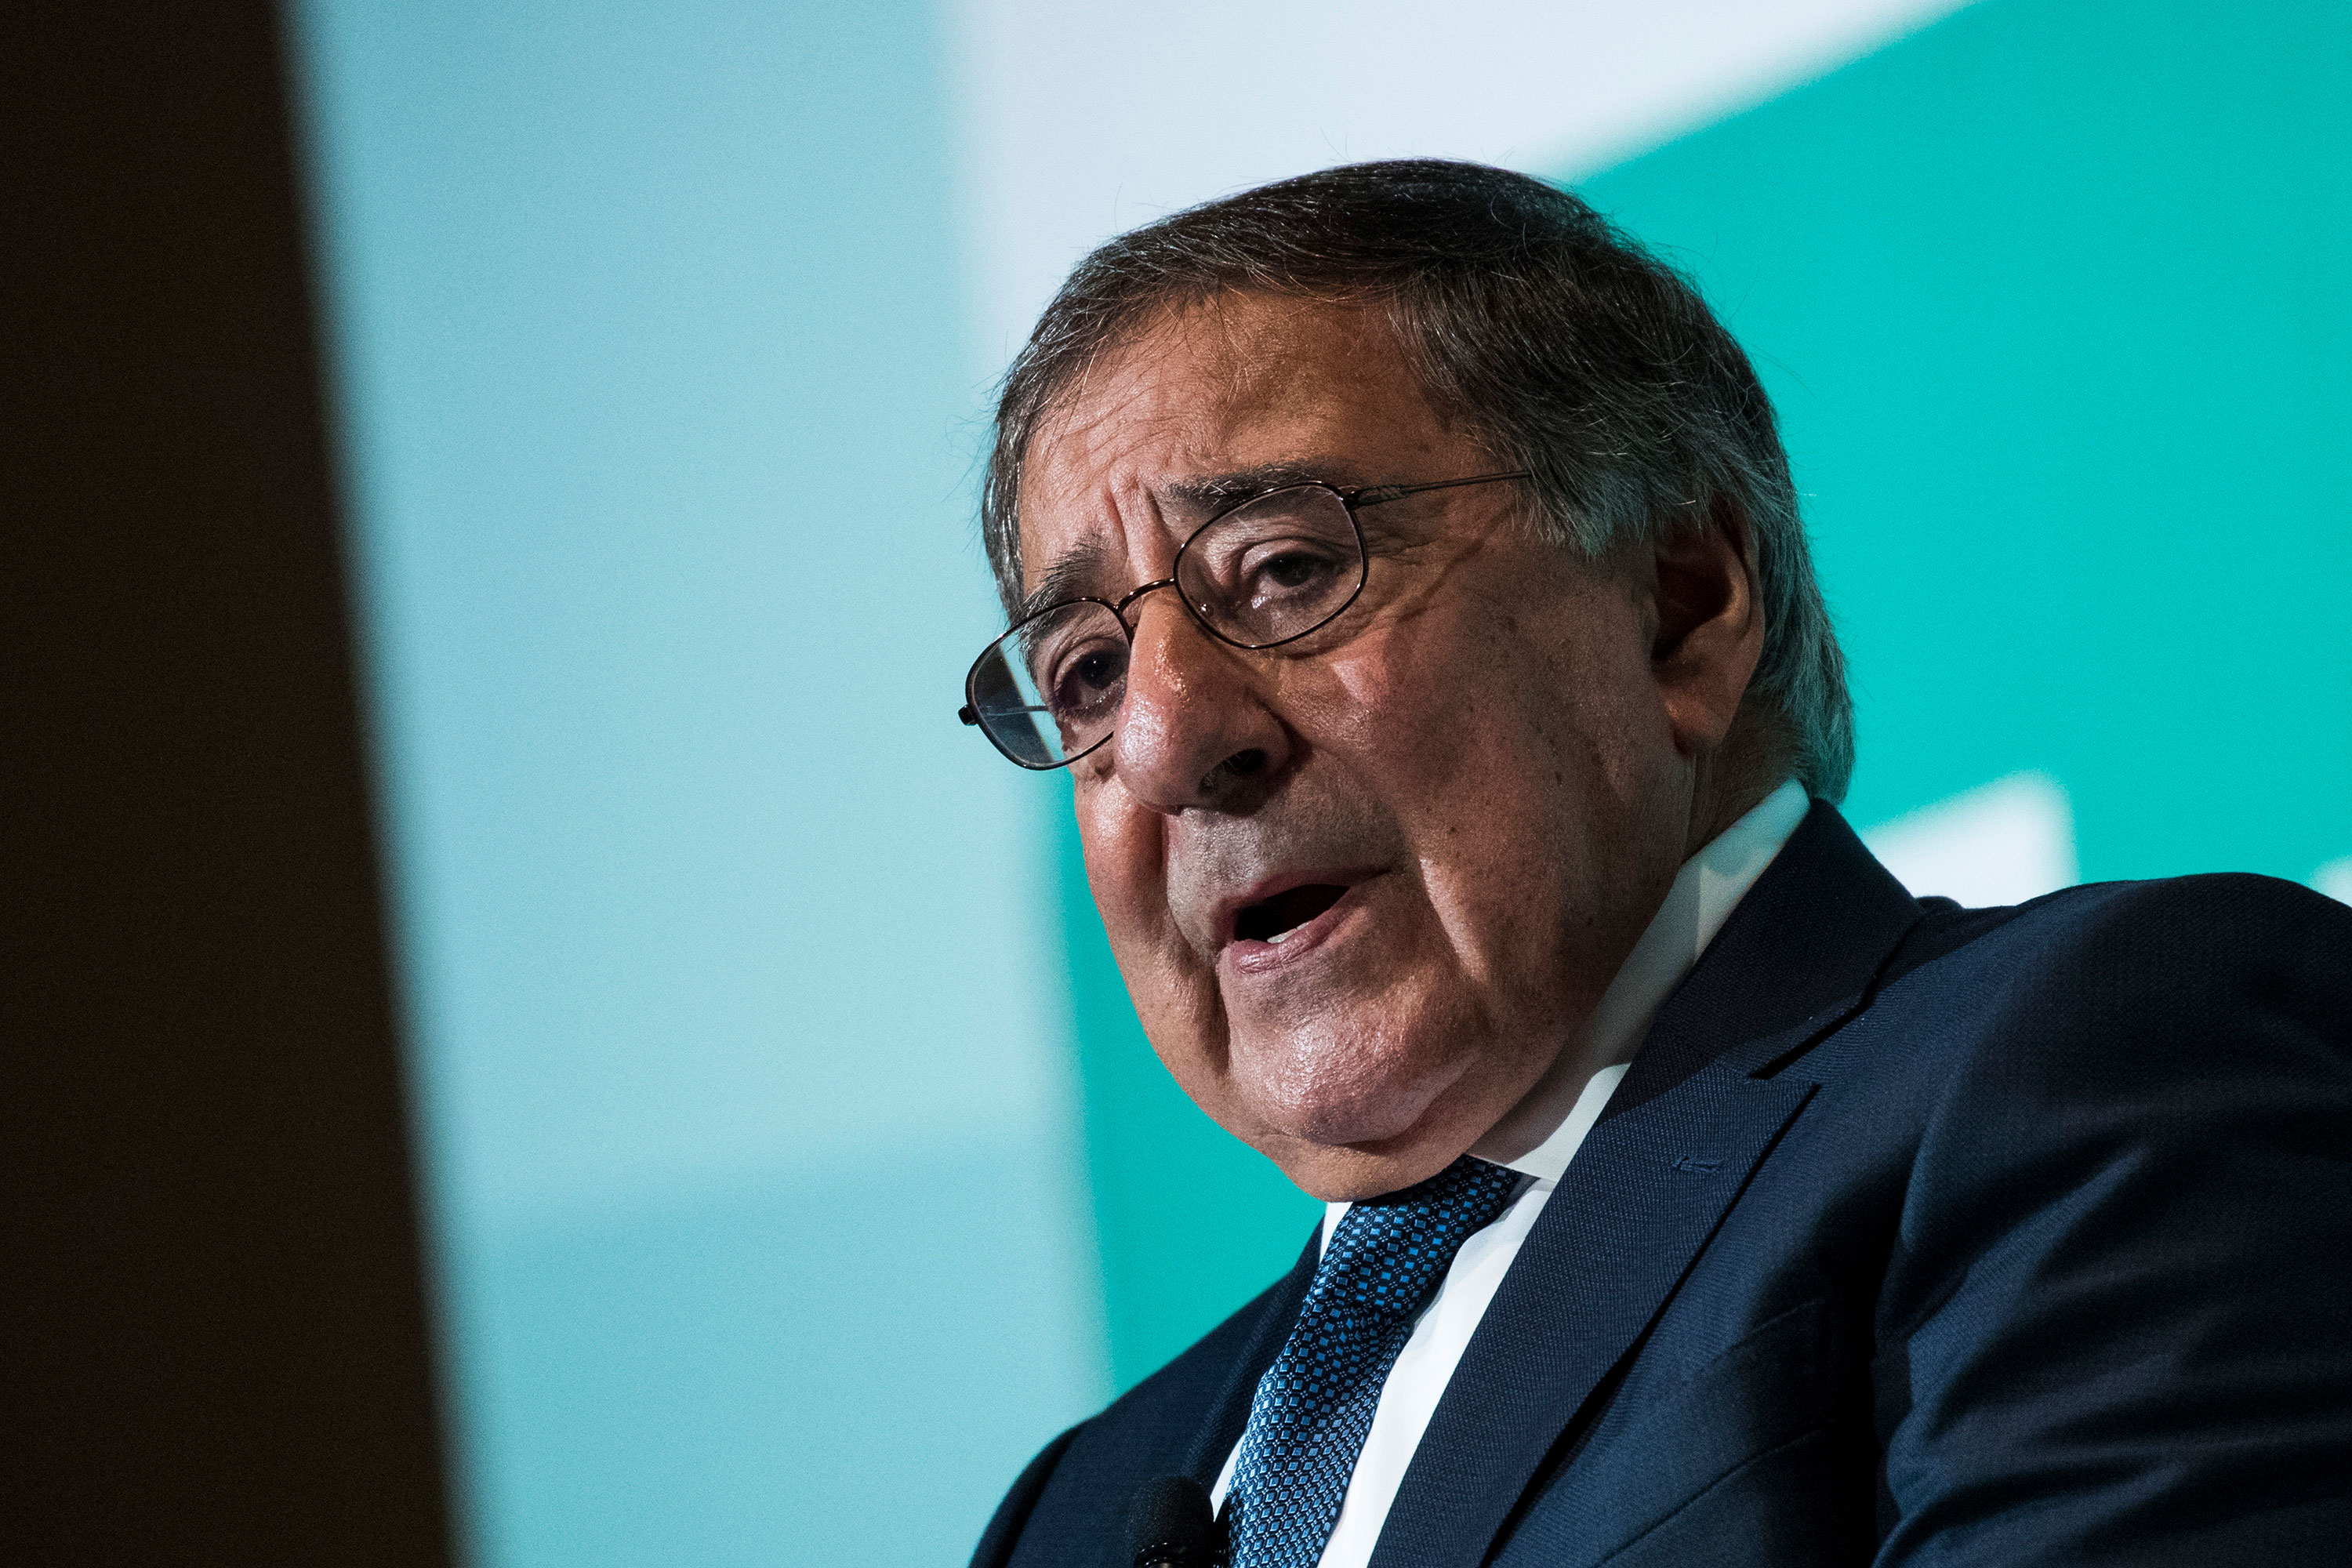 Leon Panetta, former U.S. Defense Secretary and former director of the Central Intelligence Agency, speaks during a discussion on countering violent extremism in 2017 in Washington, DC. 